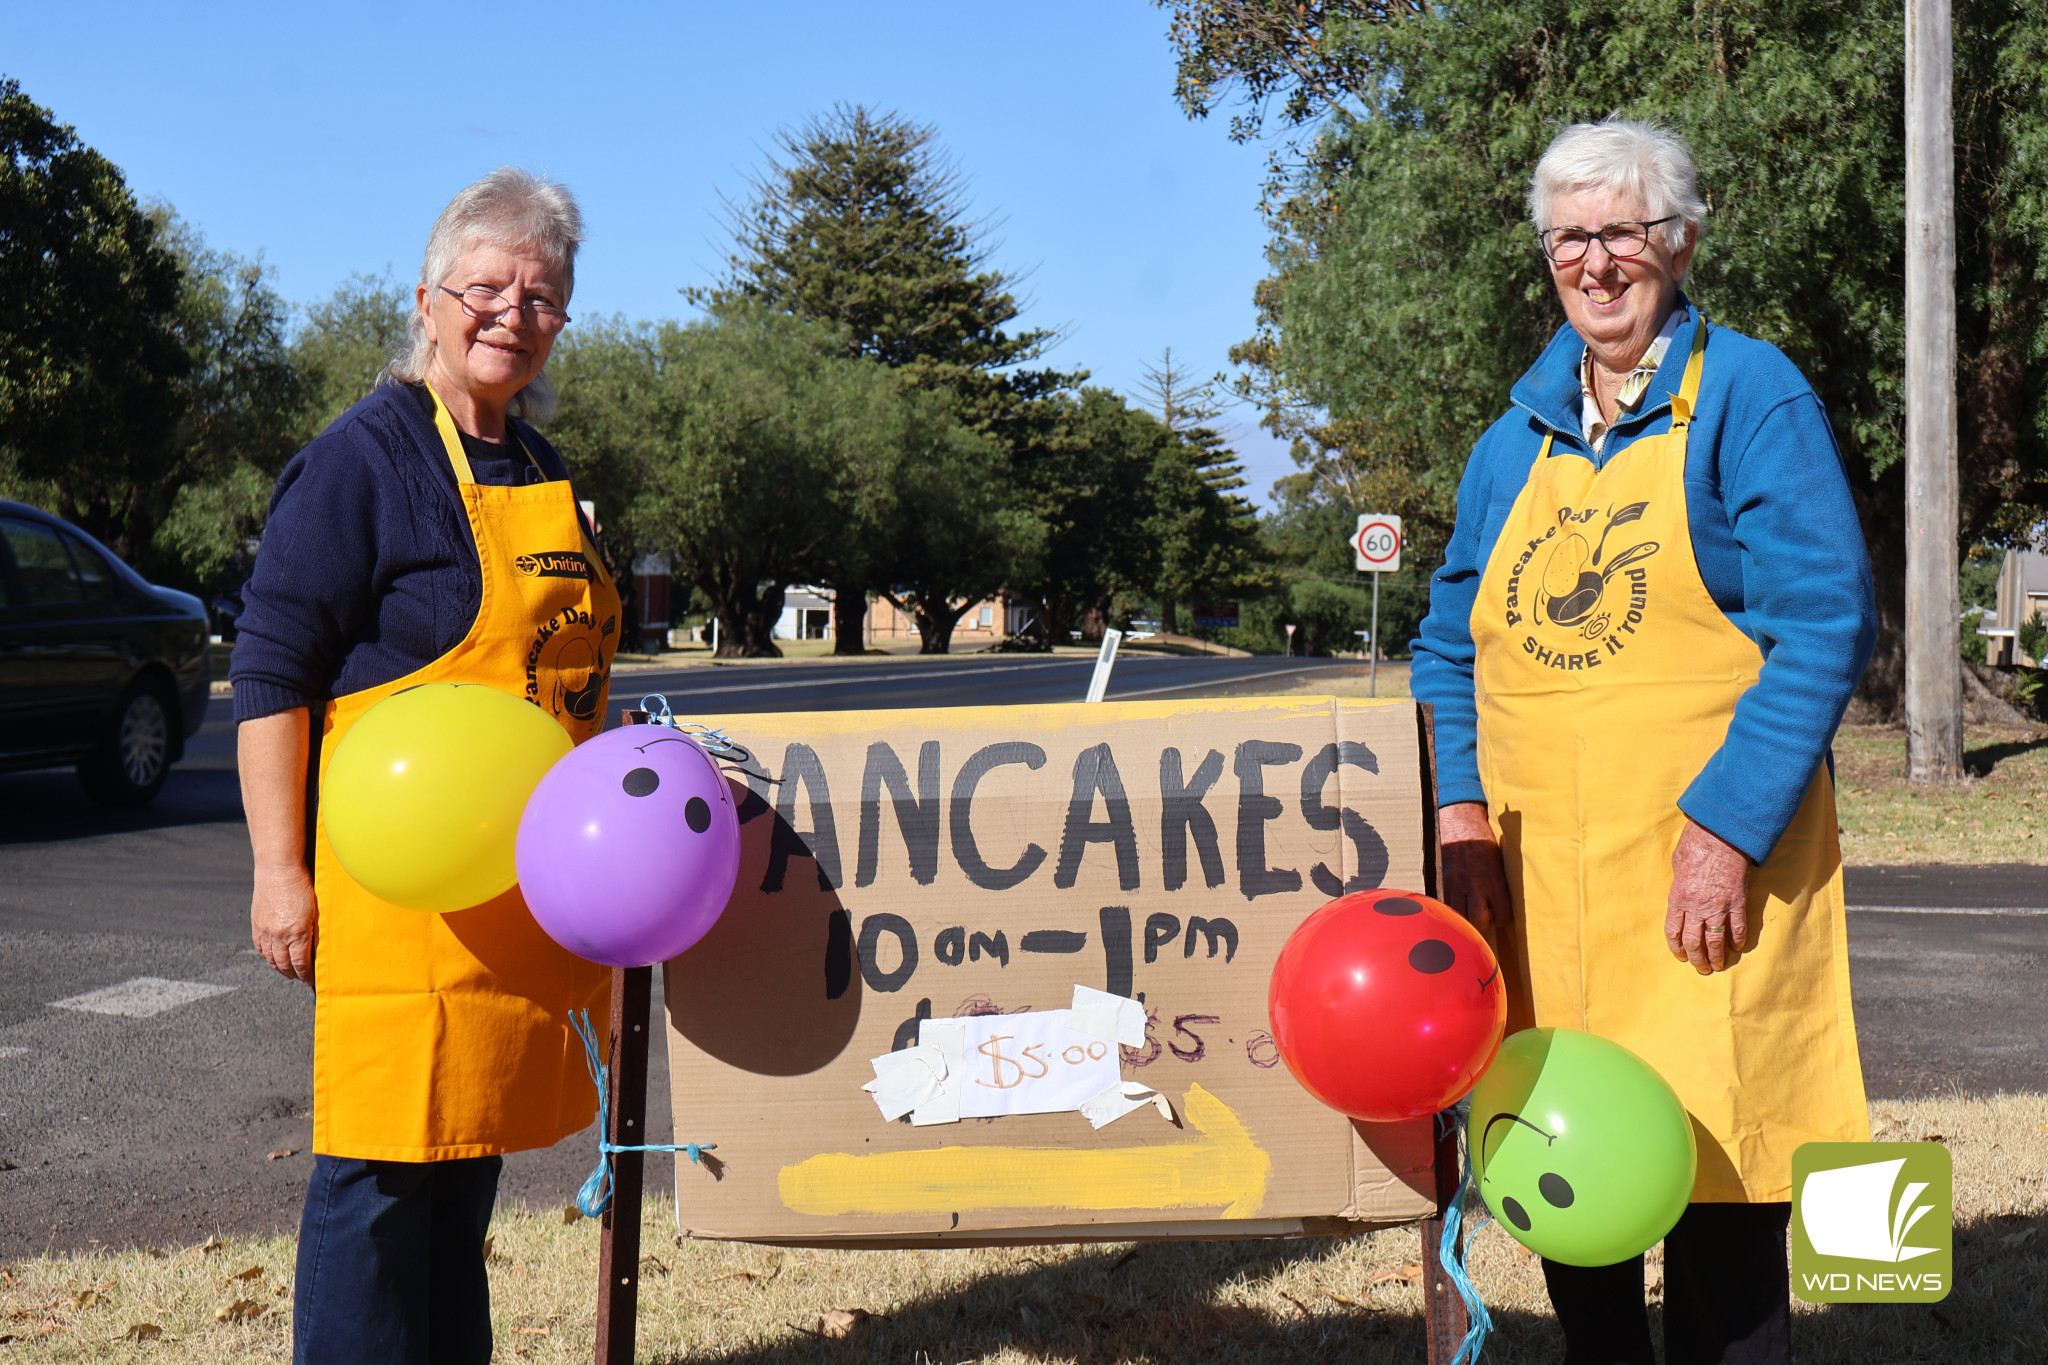 Breakfast is served: Members of the Mortlake Uniting Church were busy in the kitchen last week, cooking up a feast to raise funds for those who have fallen on hard times as part of the church’s annual Pancake Day sales.